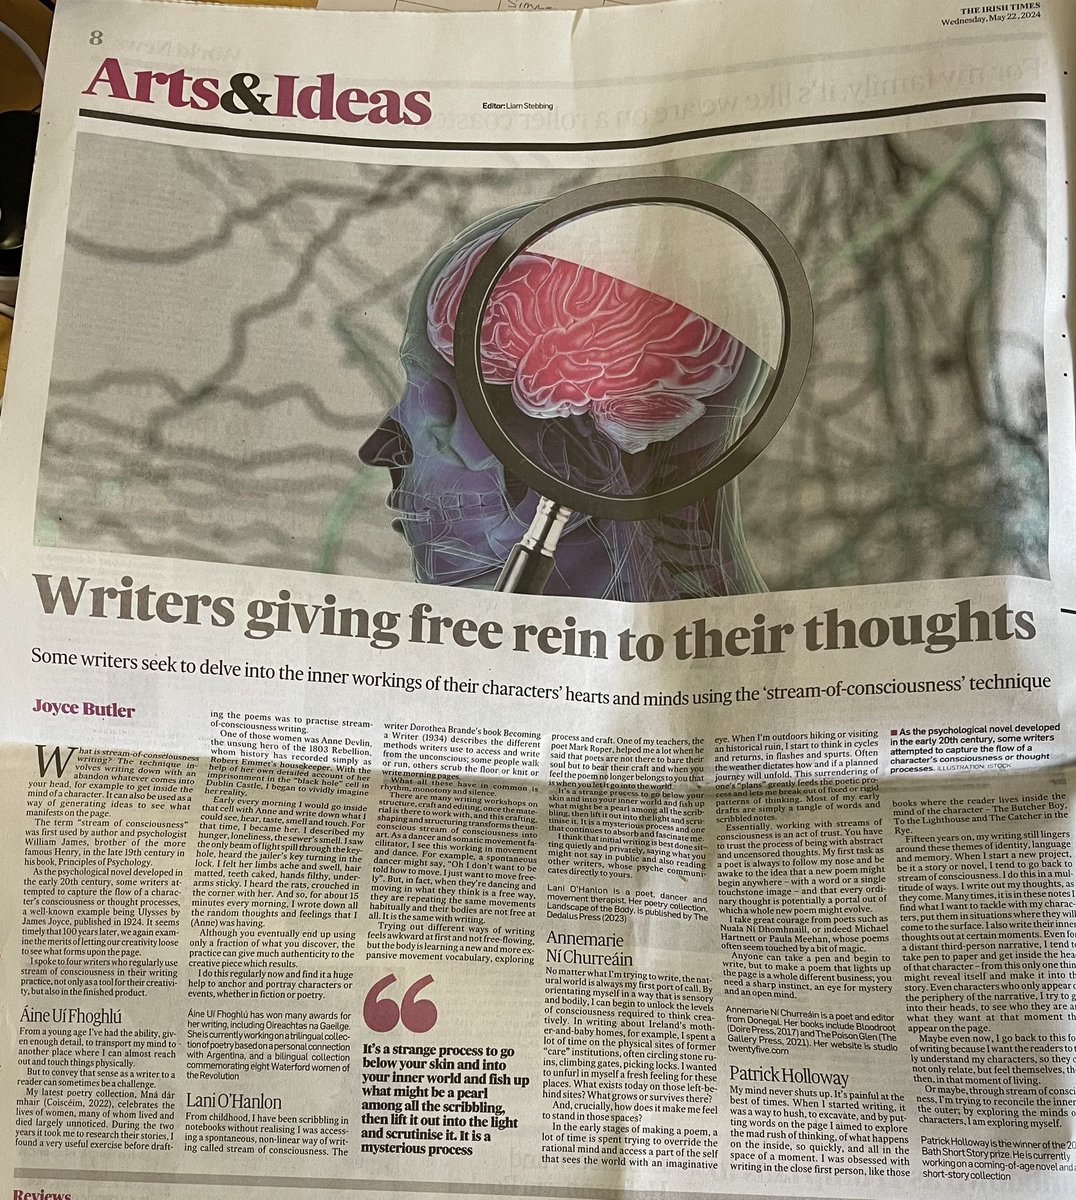 My article today in @IrishTimesCultr on four Irish writers who use the stream-of-consciousness technique, not only as a tool for their creativity, but also in the finished product. @LaniohanlonO @AFhoghlu @hollowaywriter2 @NiChurr With thanks to @MartinDoyleIT